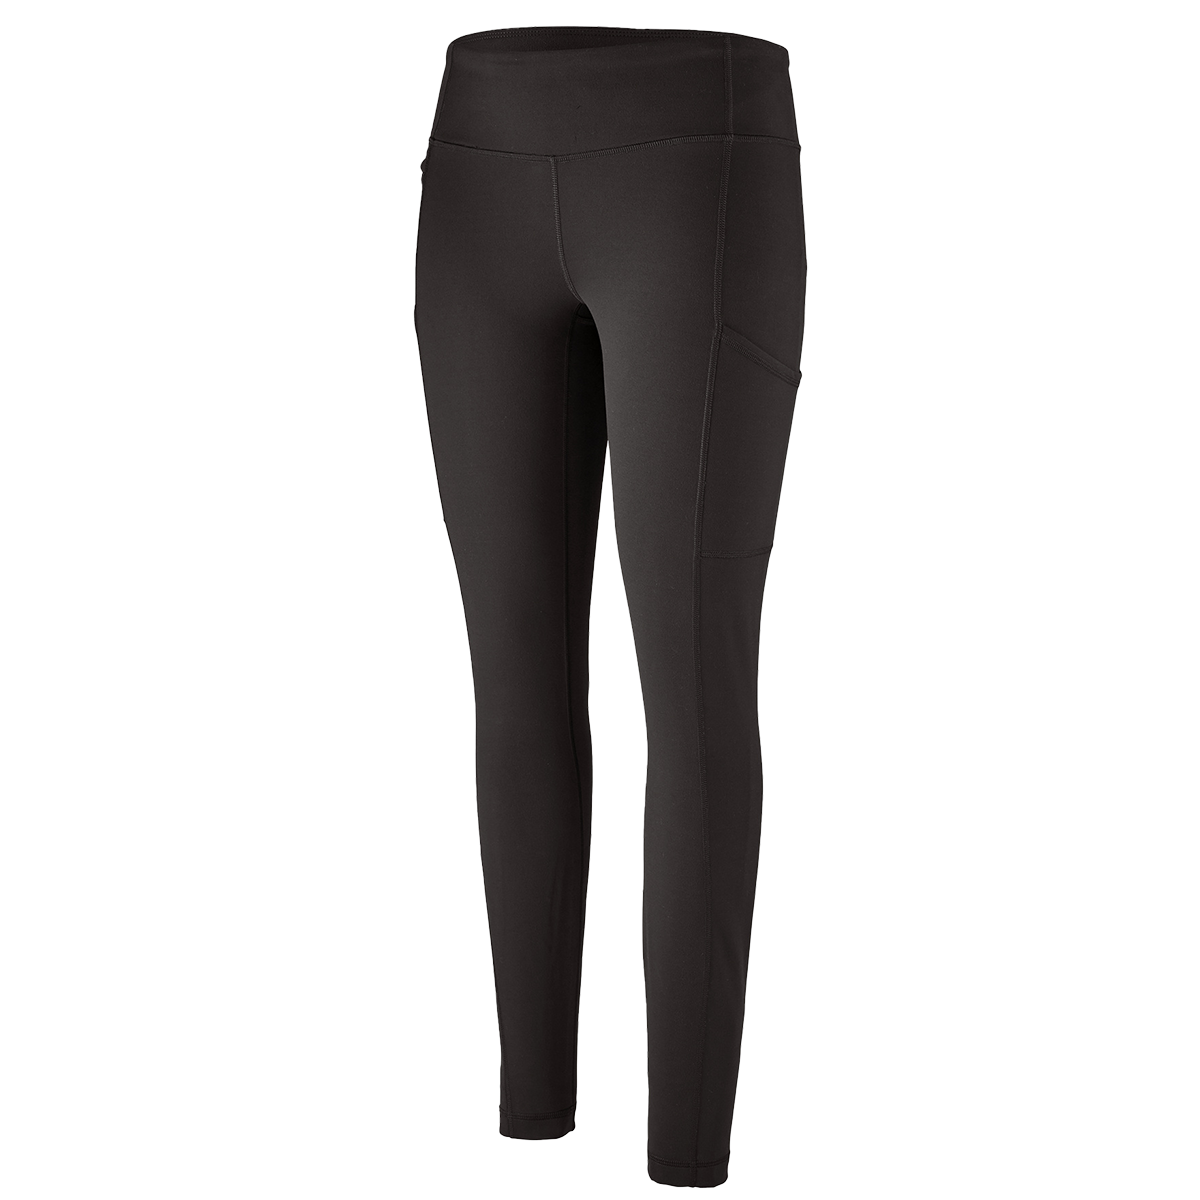 Women's Pack Out Tights alternate view